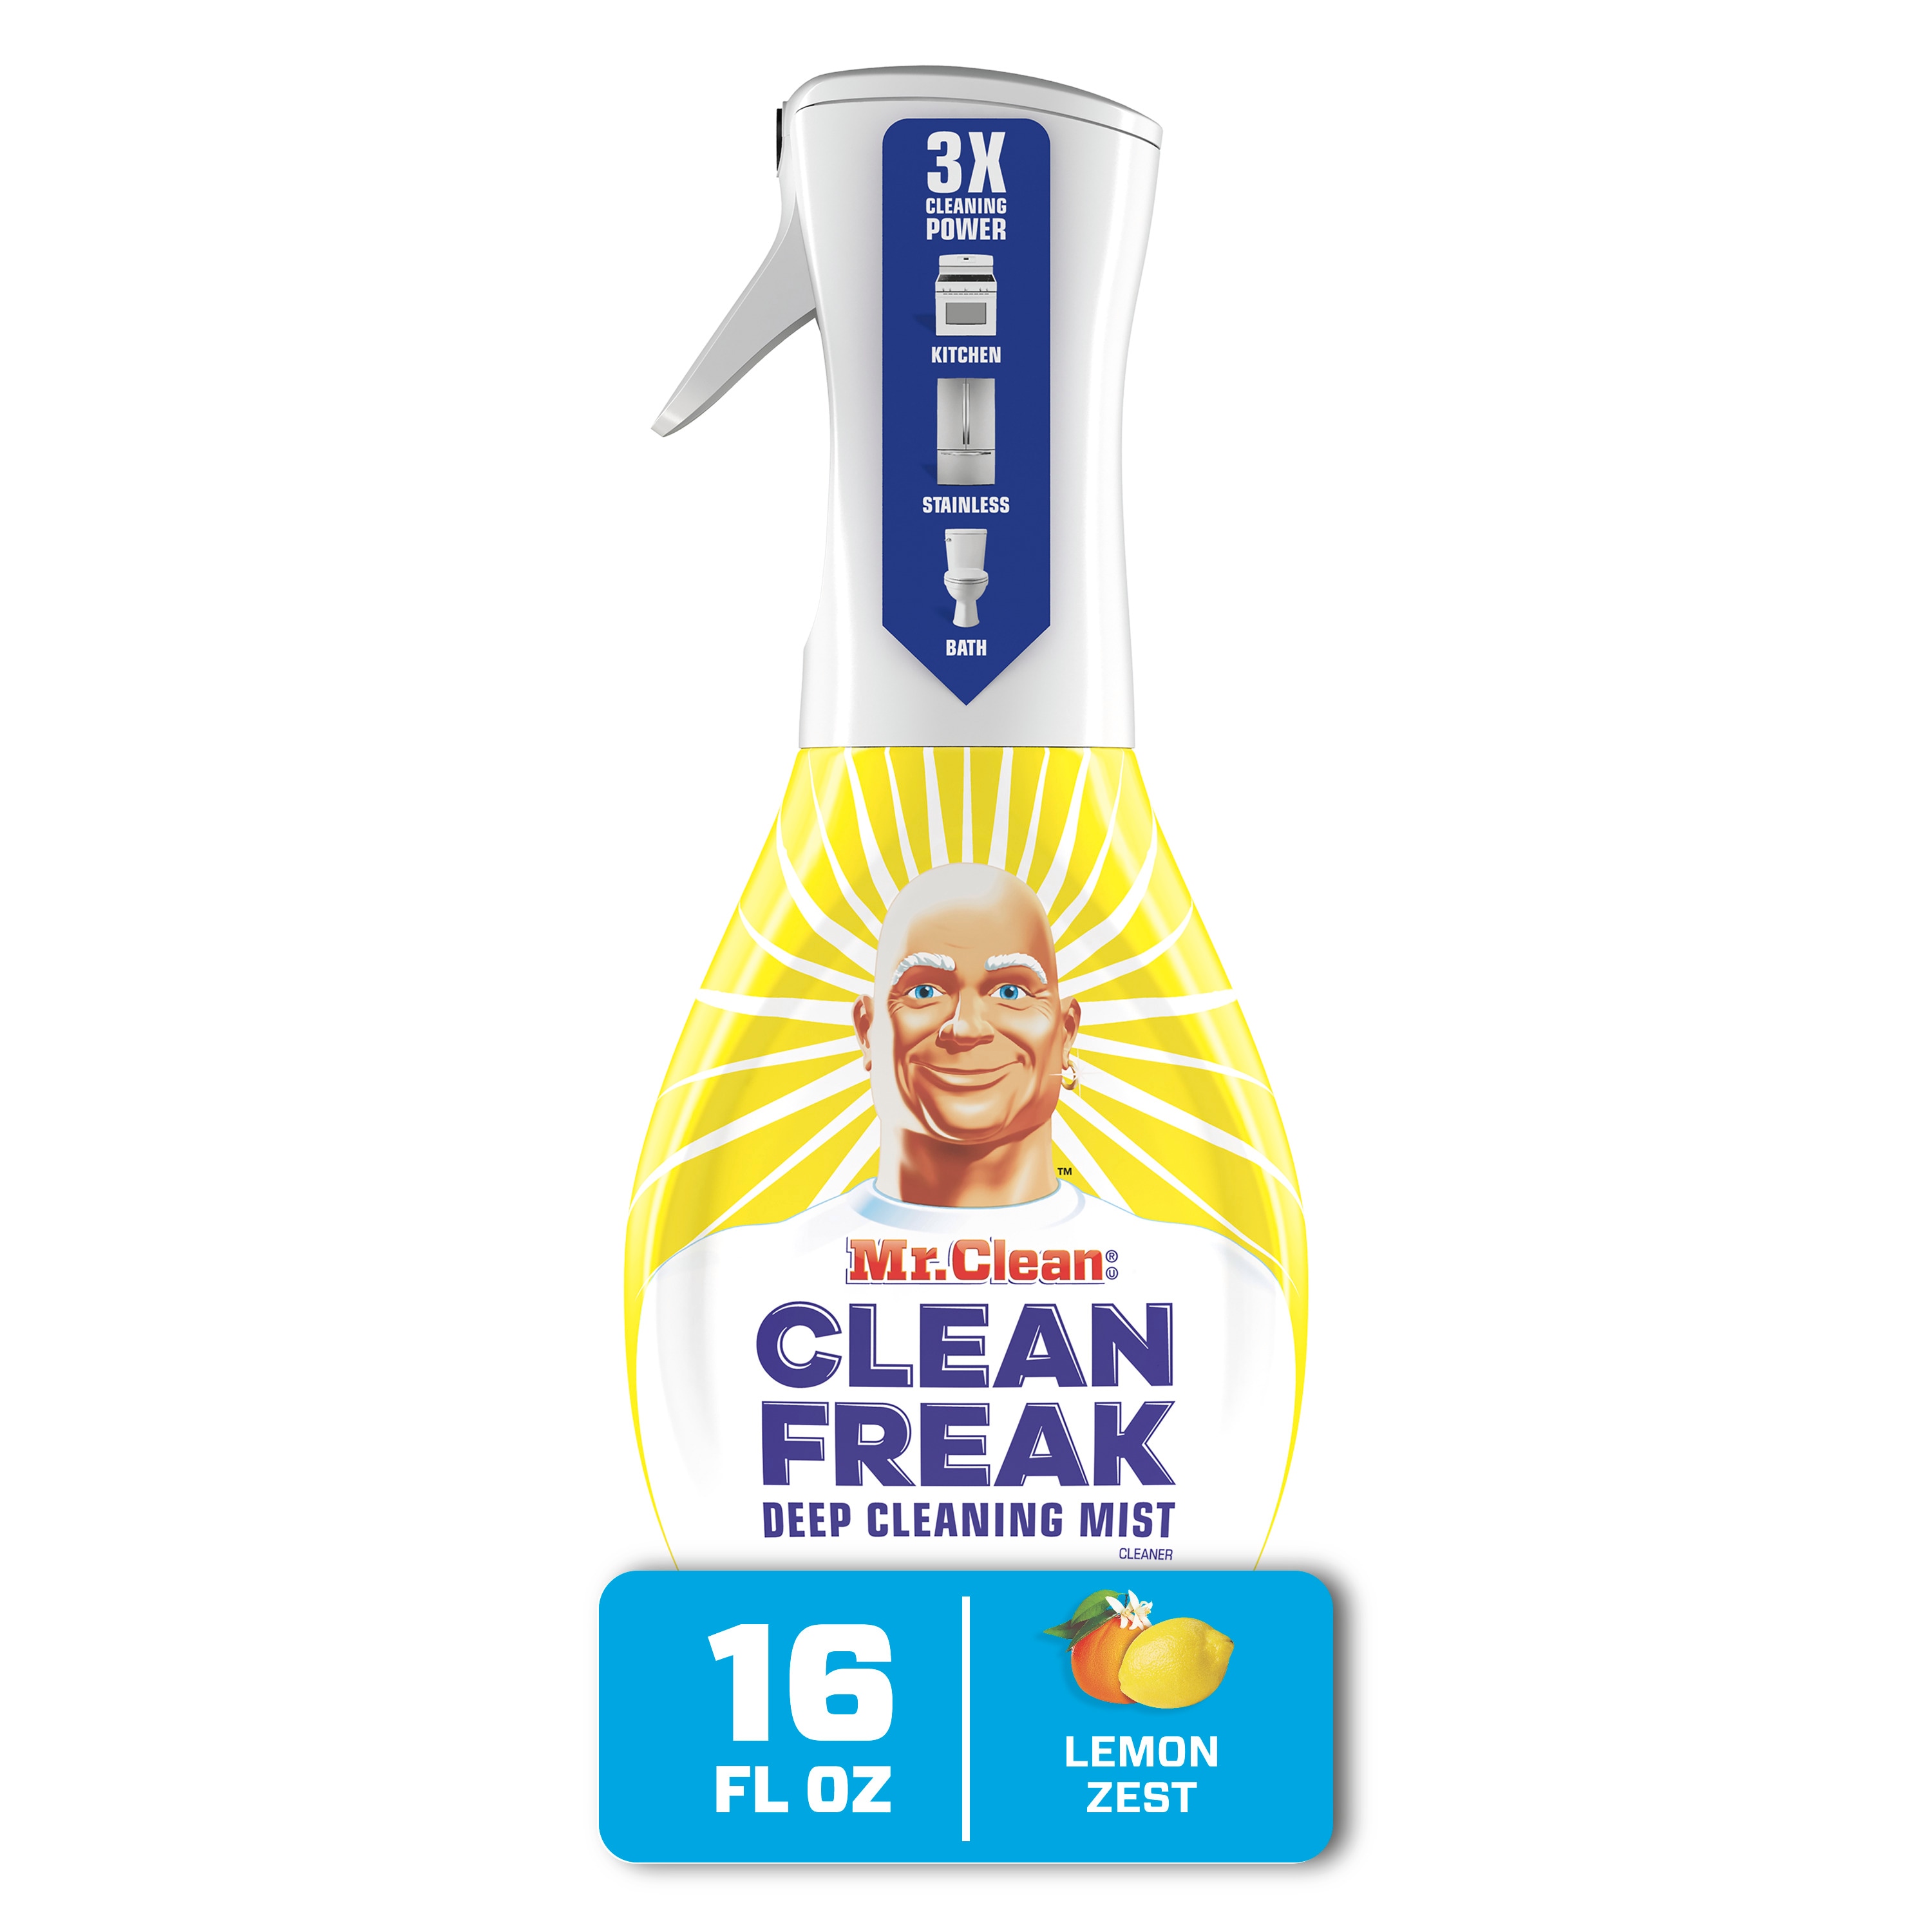 I was wasting so much on the refills and personally the Mr Clean